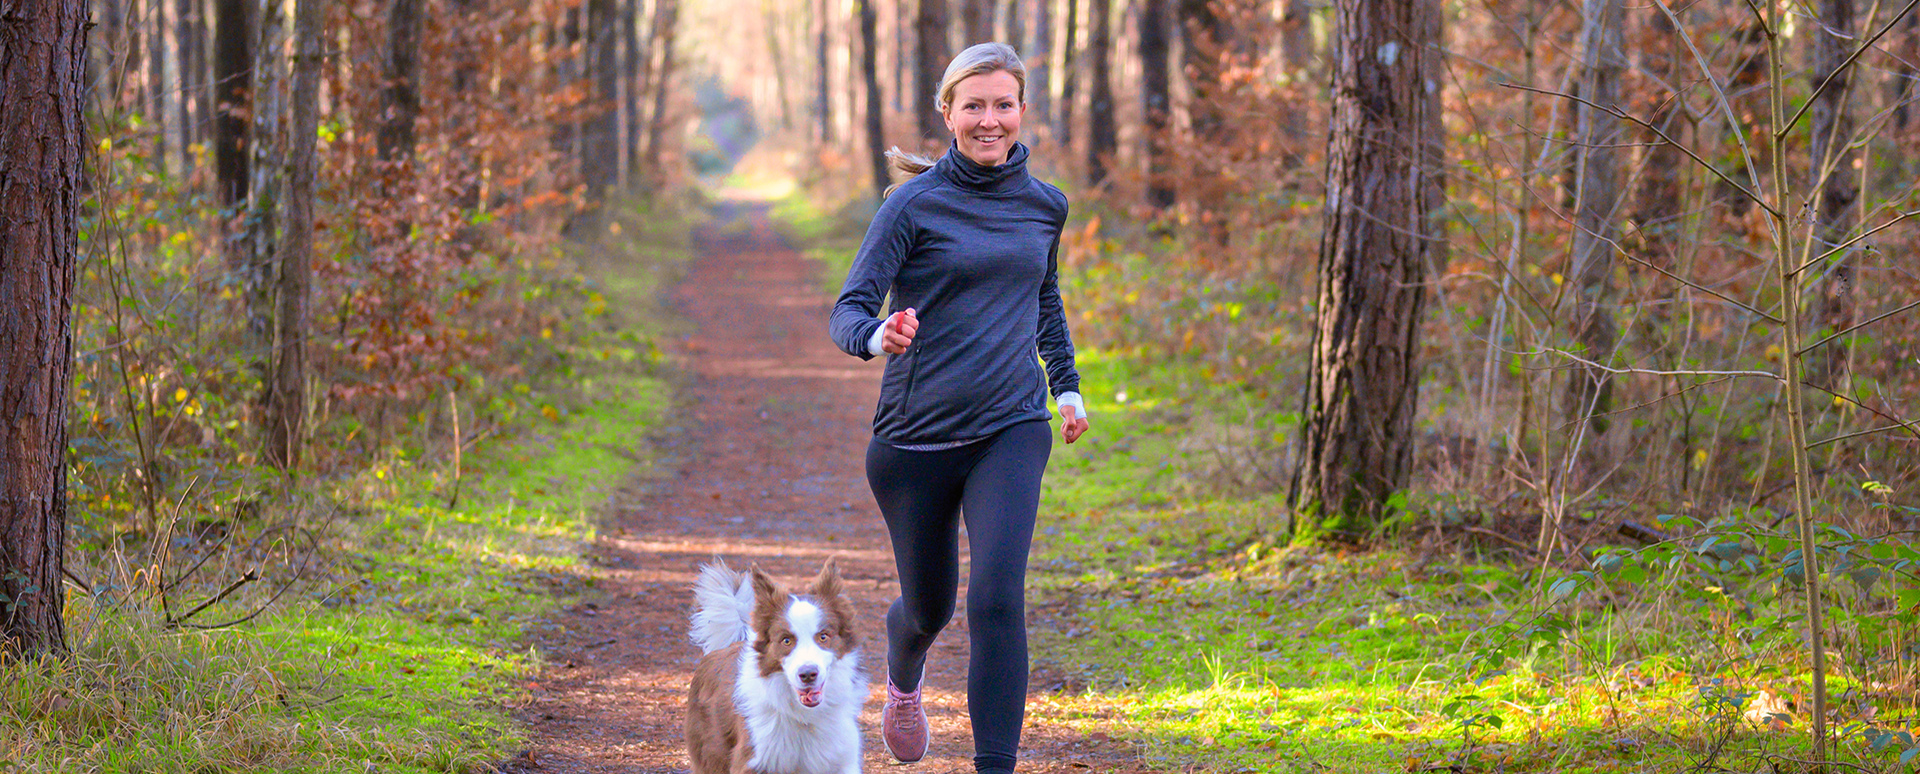 older woamn running in woods with dog